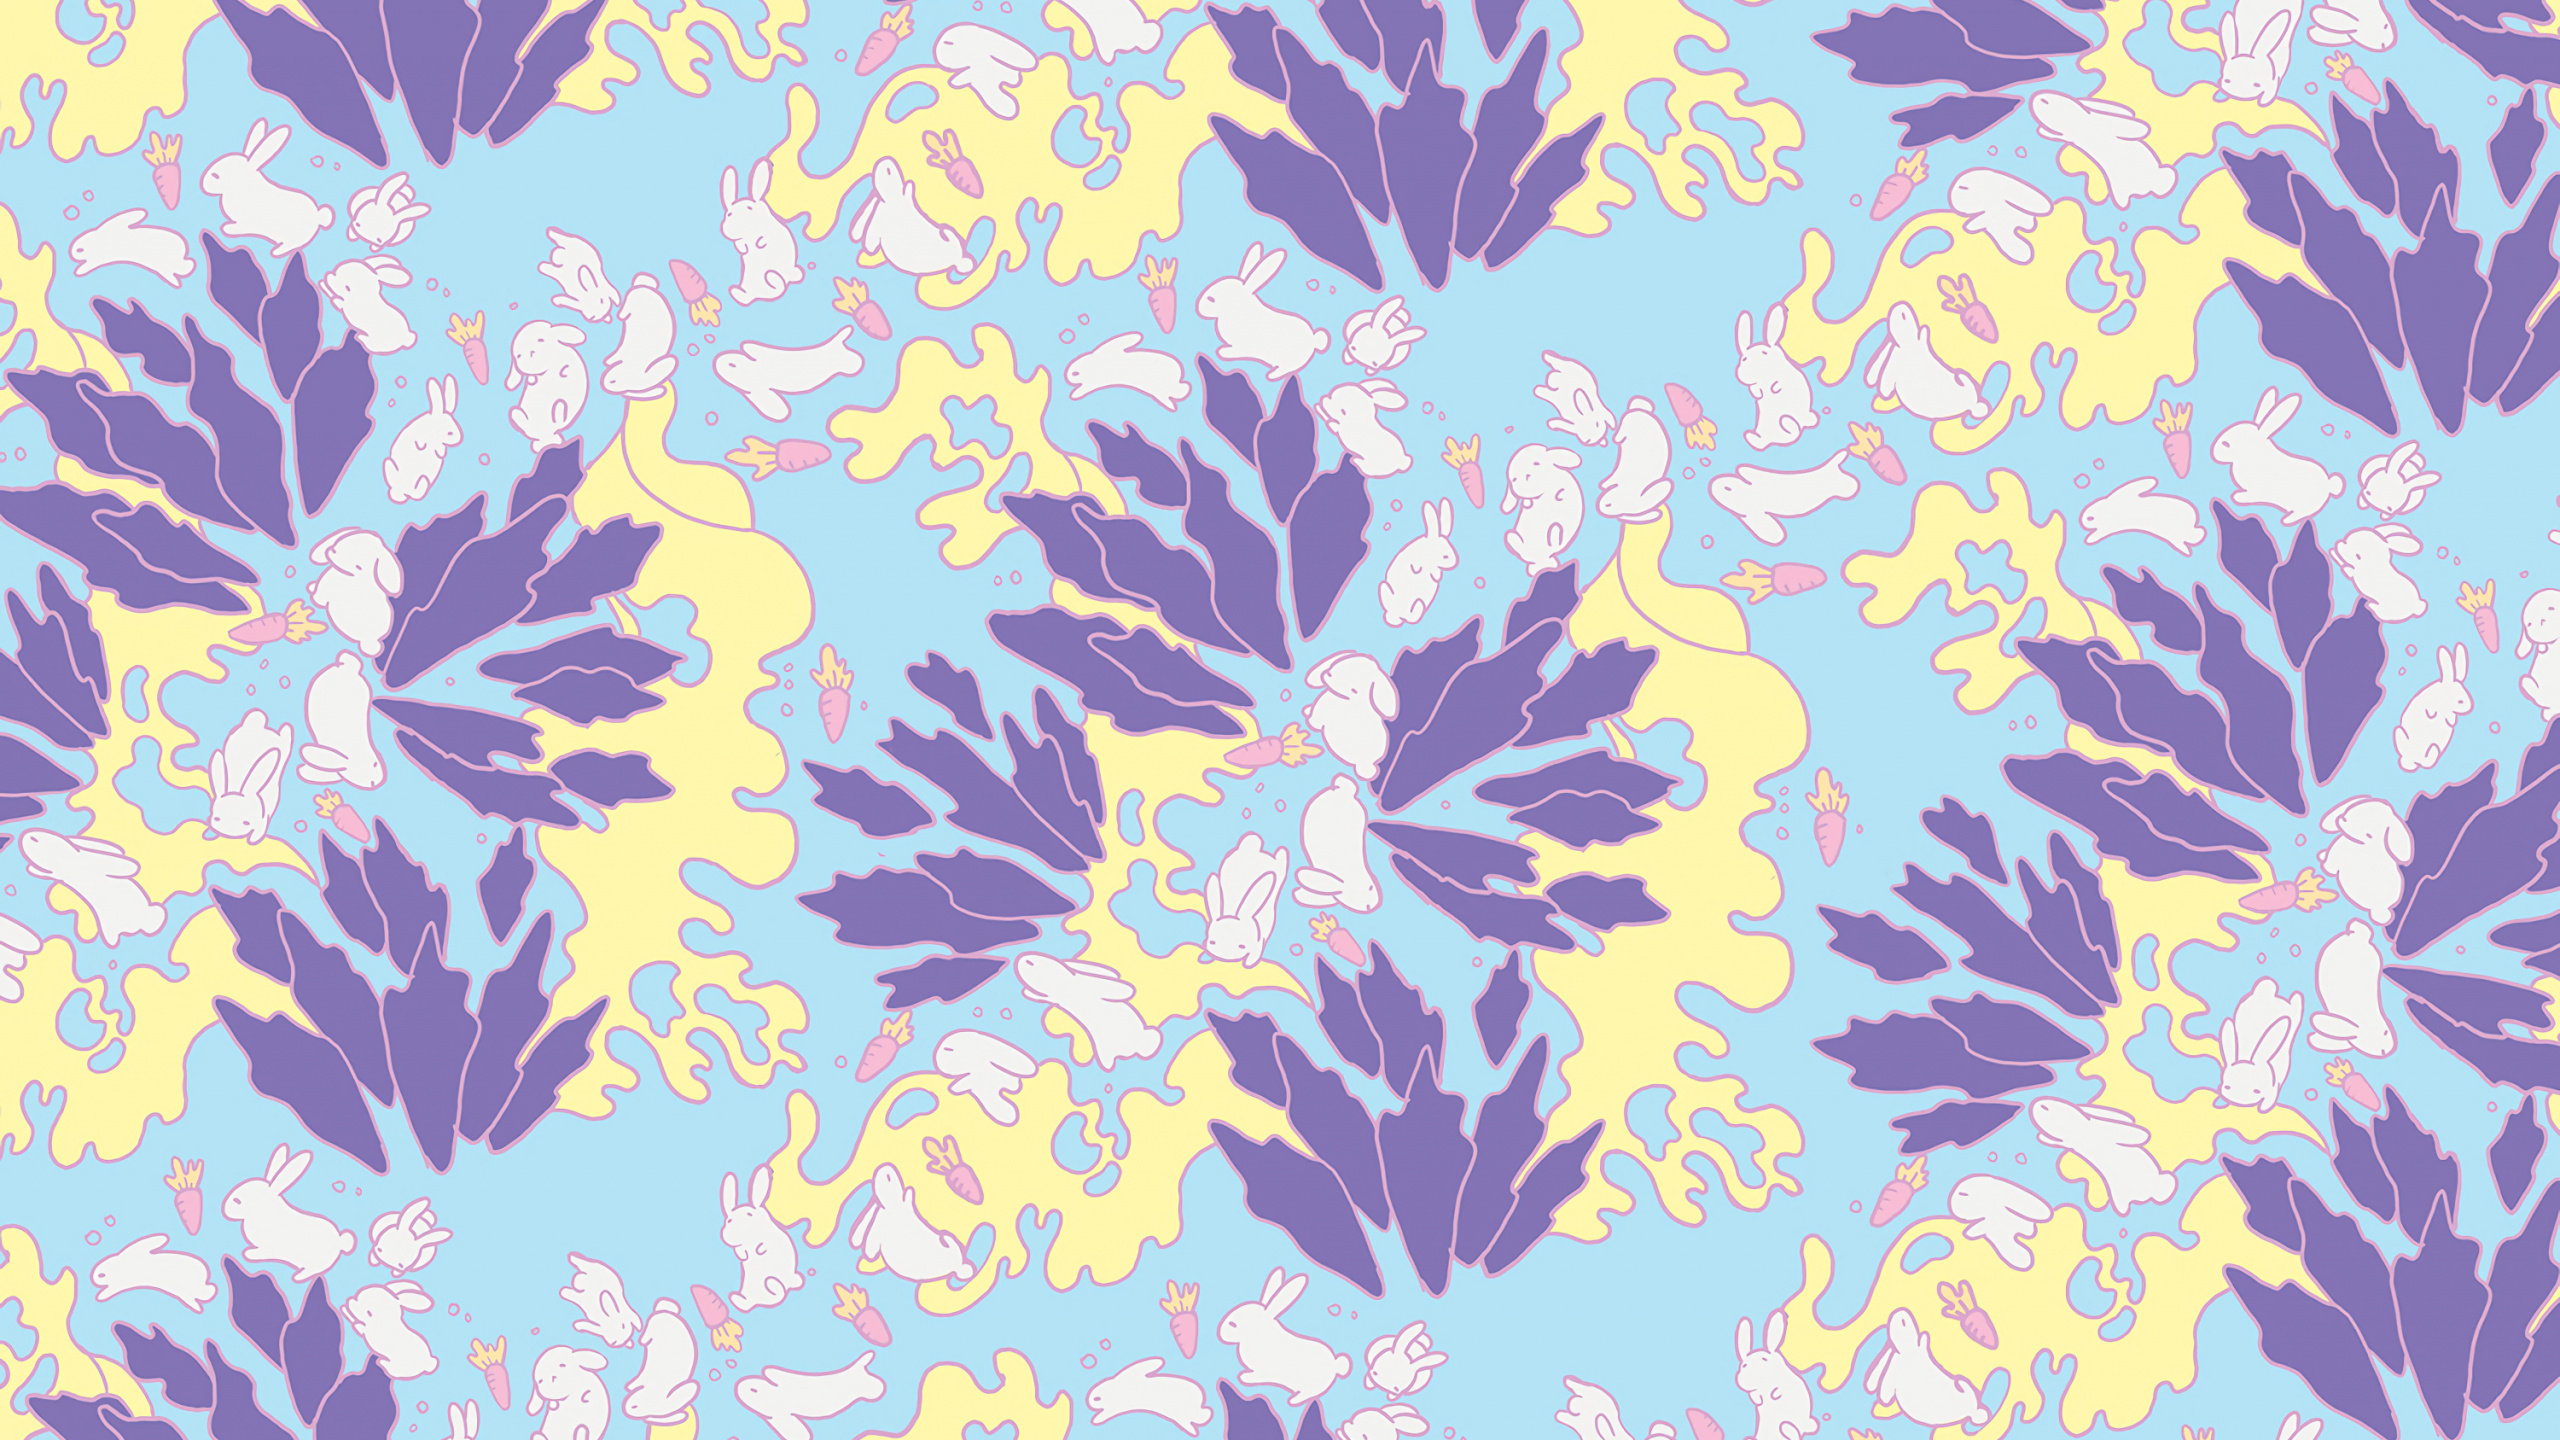 Blue Yellow and Black Floral Textile. Wallpaper in 2560x1440 Resolution